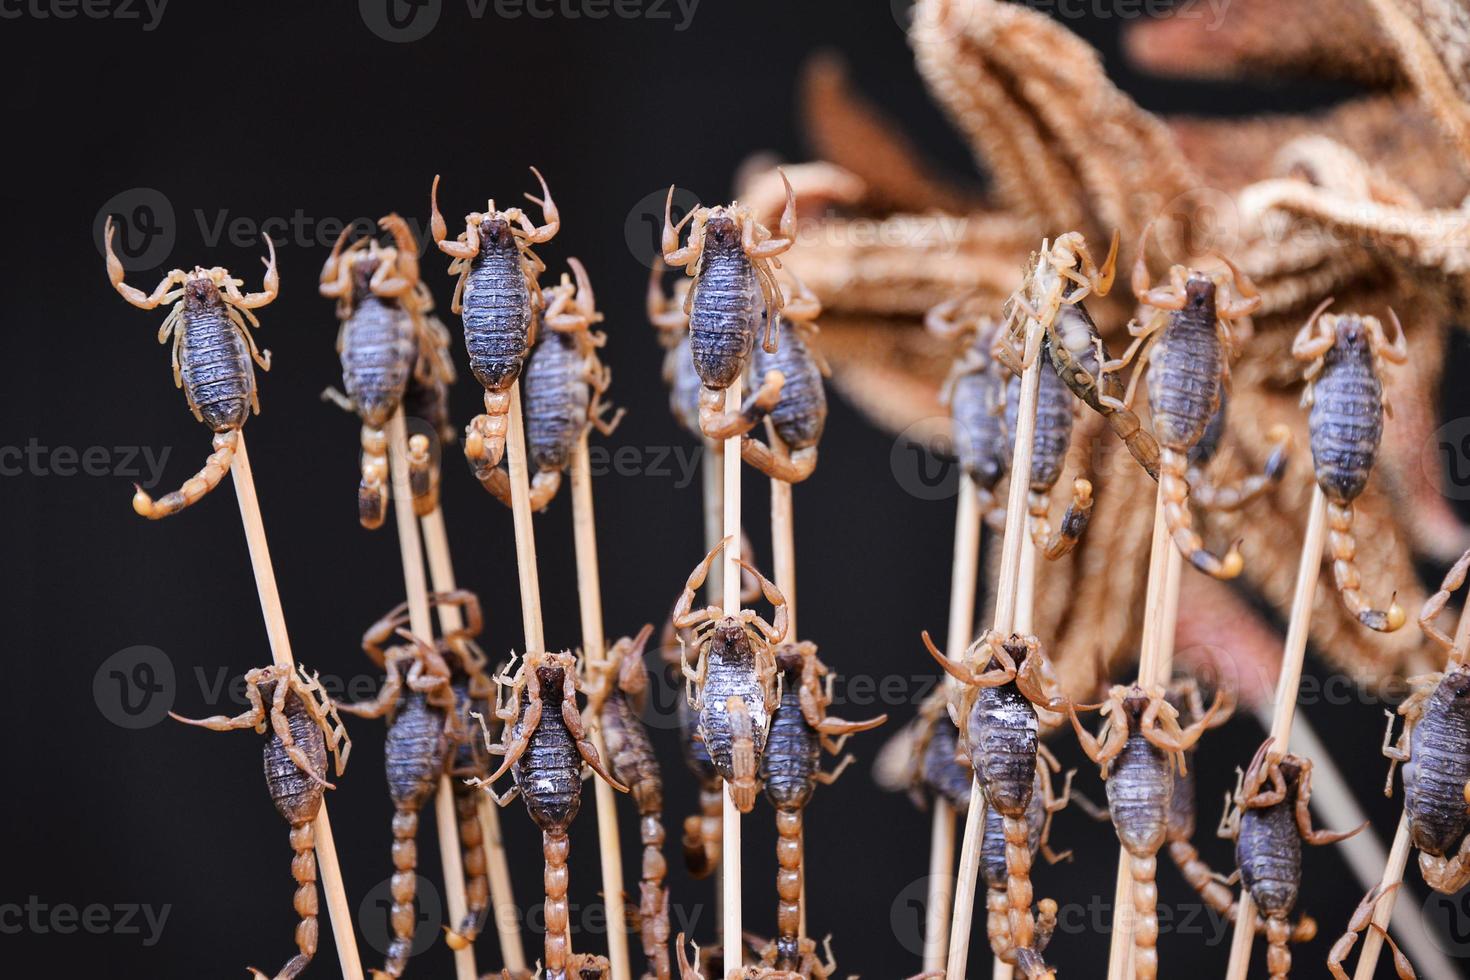 fried insects and scorpions as snack street food in China, Beijing photo